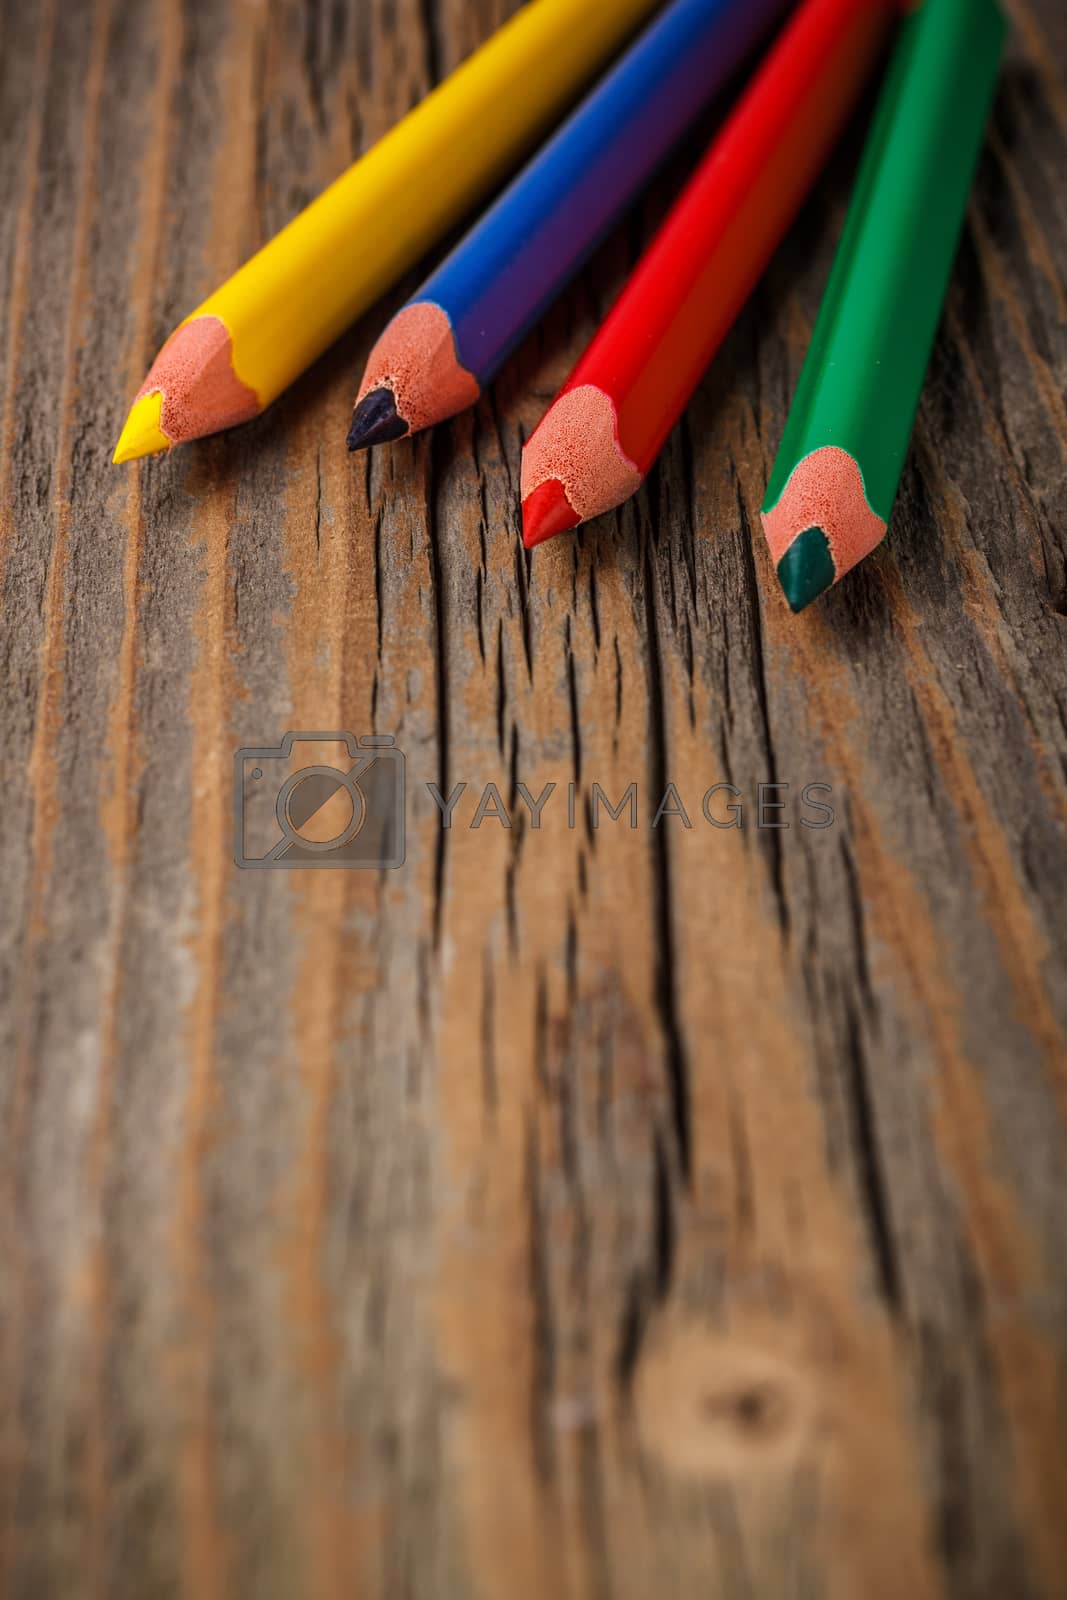 Royalty free image of Colour pencils by grafvision